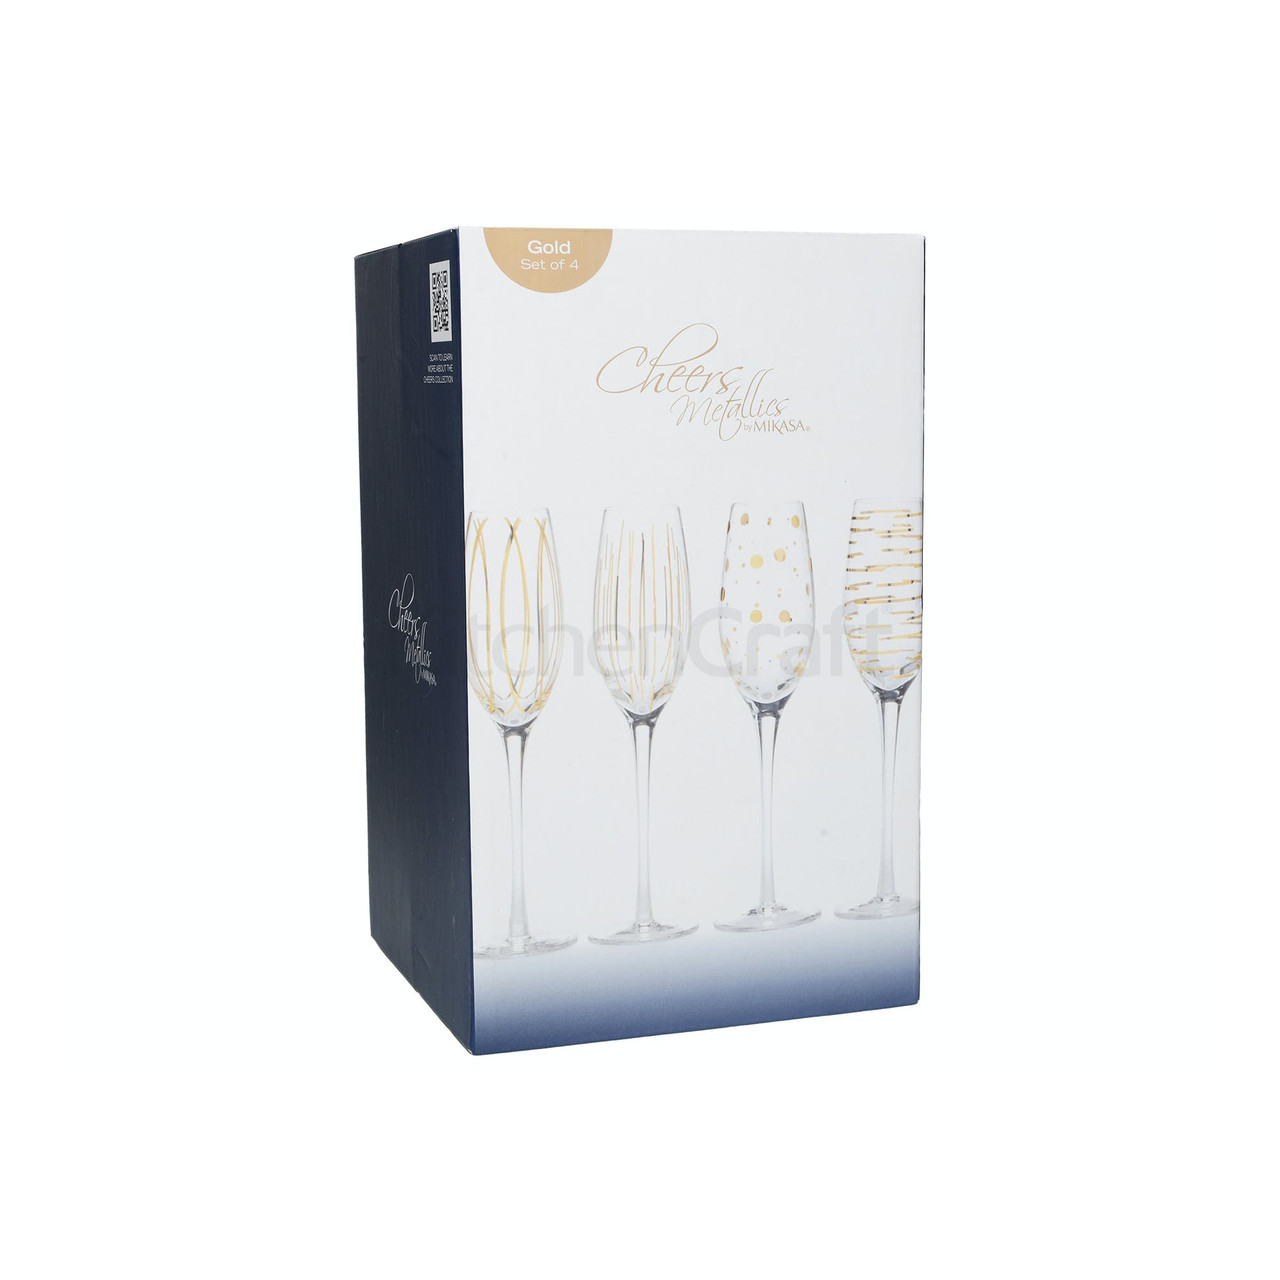 Mikasa Cheers Metallic Gold Set Of 4 7Oz Flute Glasses (LOCAL DELIVERY ONLY)